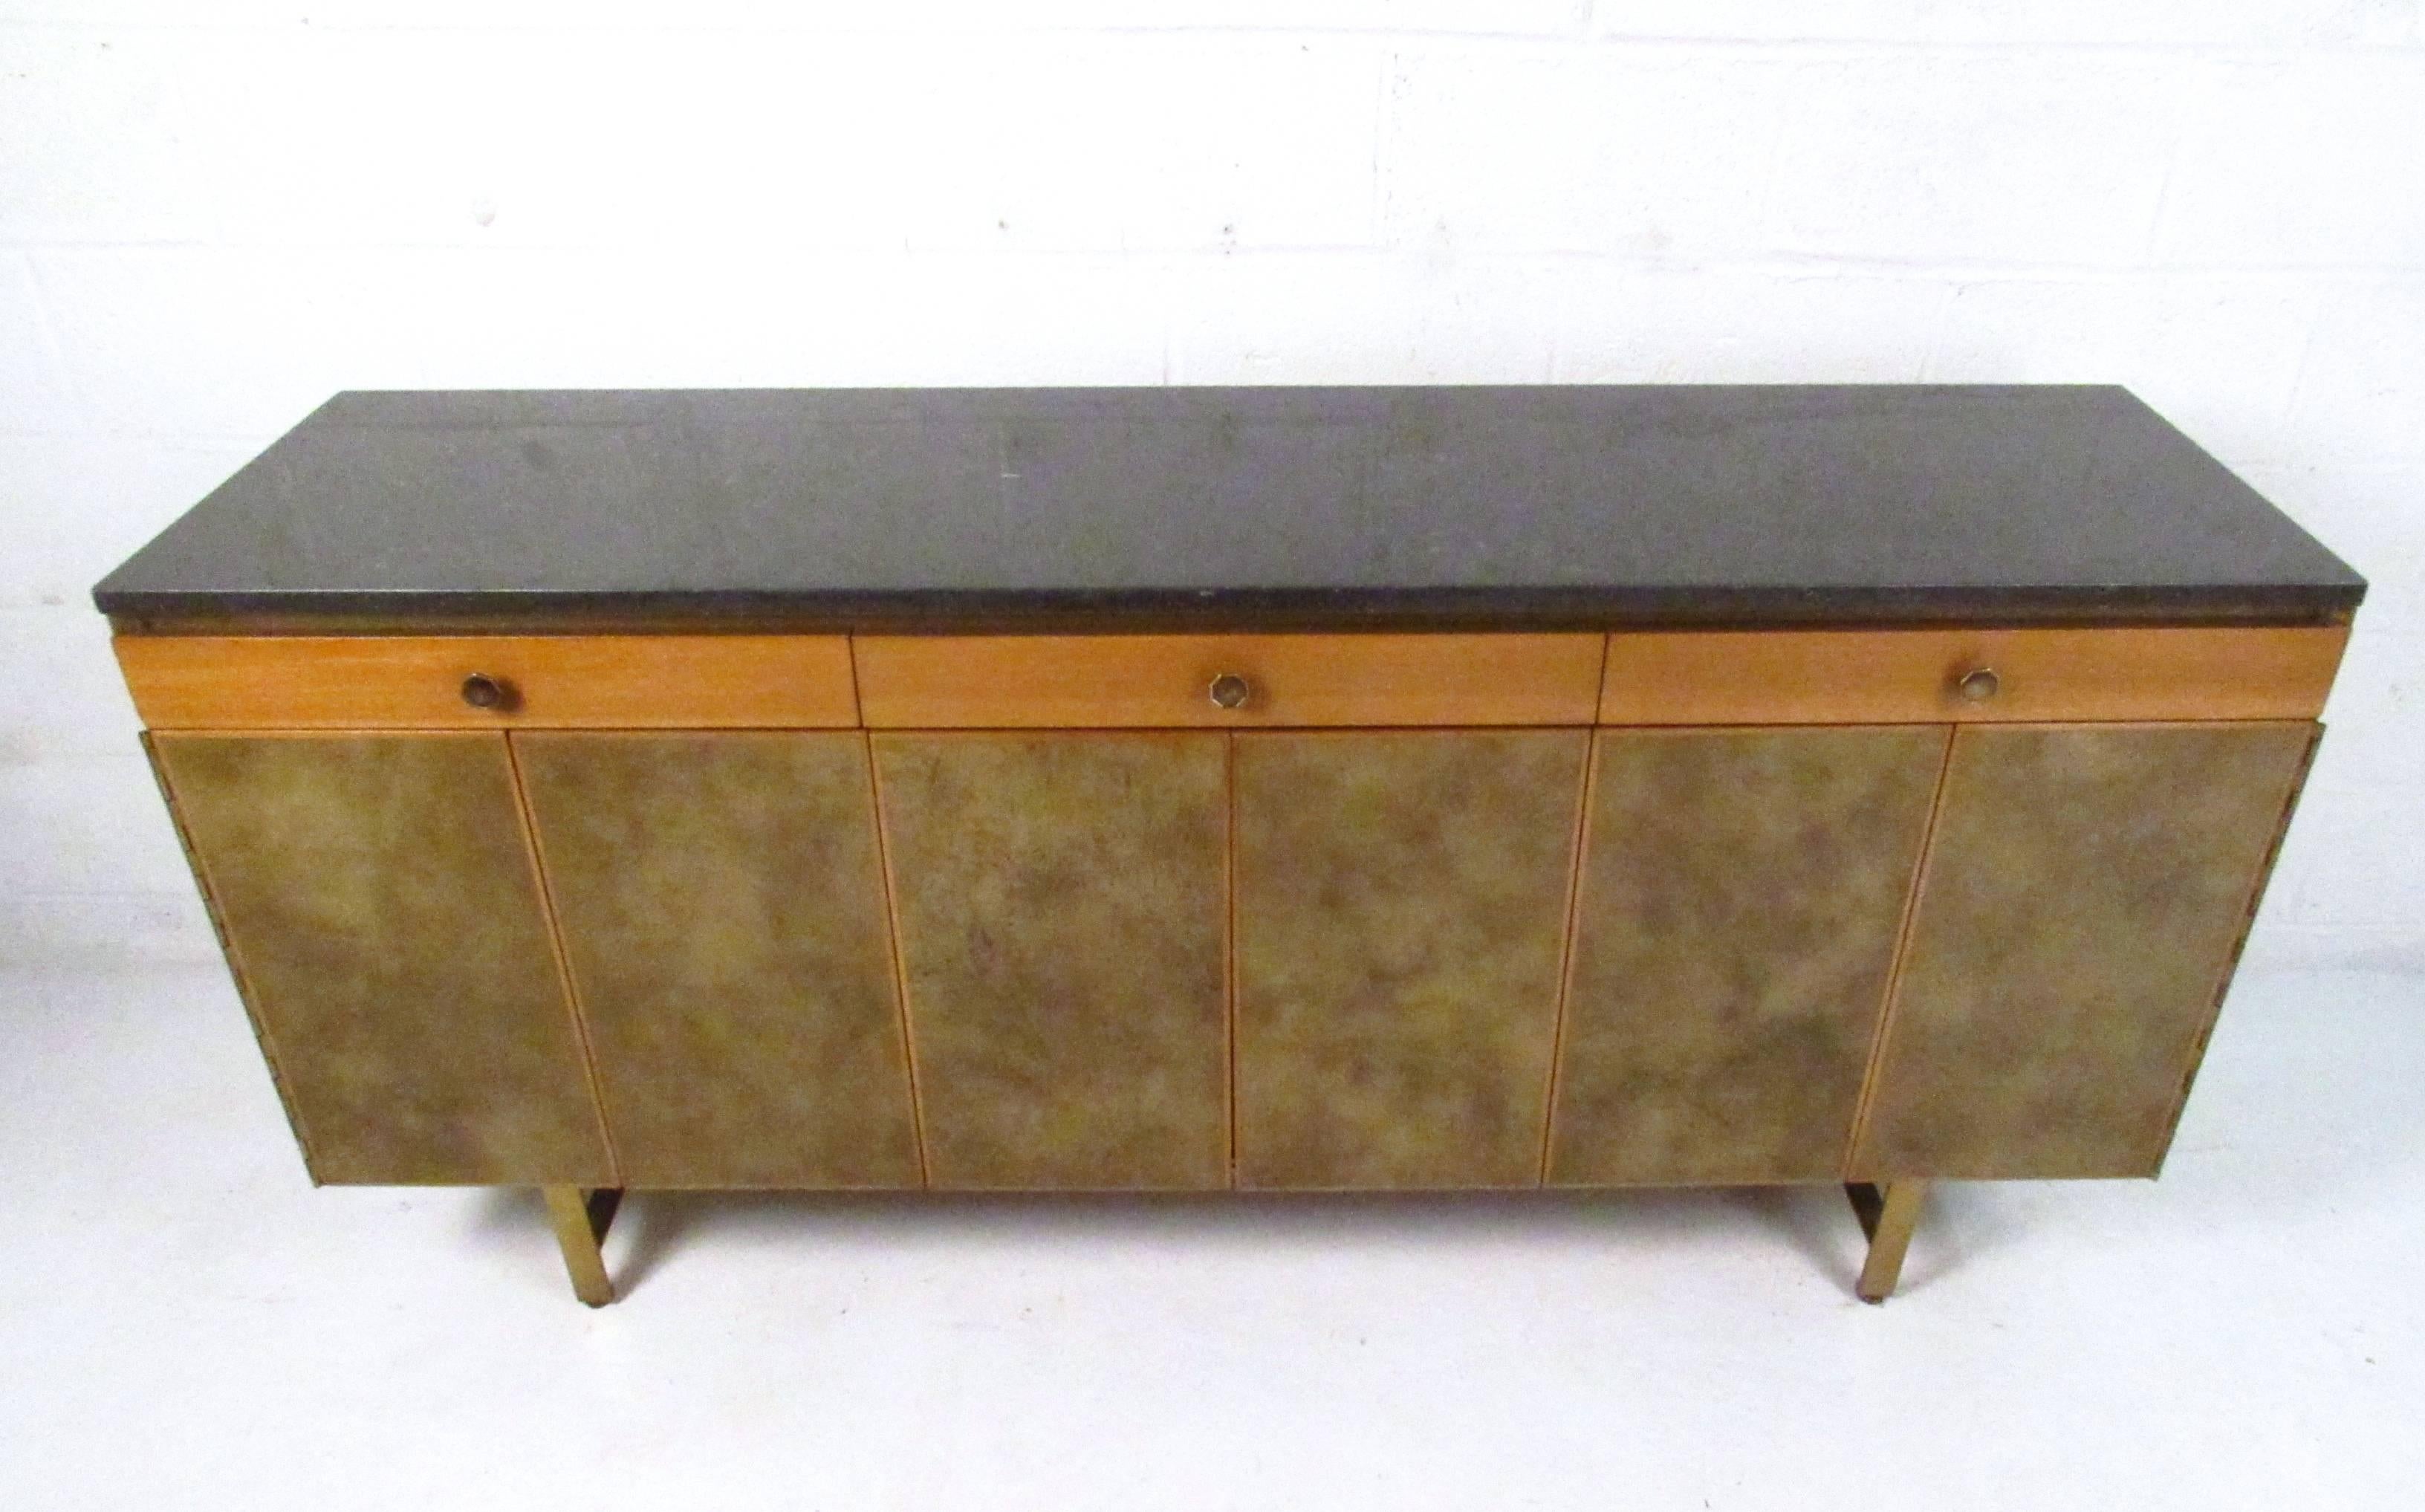 This beautiful vintage McCobb sideboard features a stylish black travertine top, unique legs and pulls and leatherette covered tri-fold cabinet doors. Original manufacturer's label still intact, internal drawers lined with same leatherette. Please